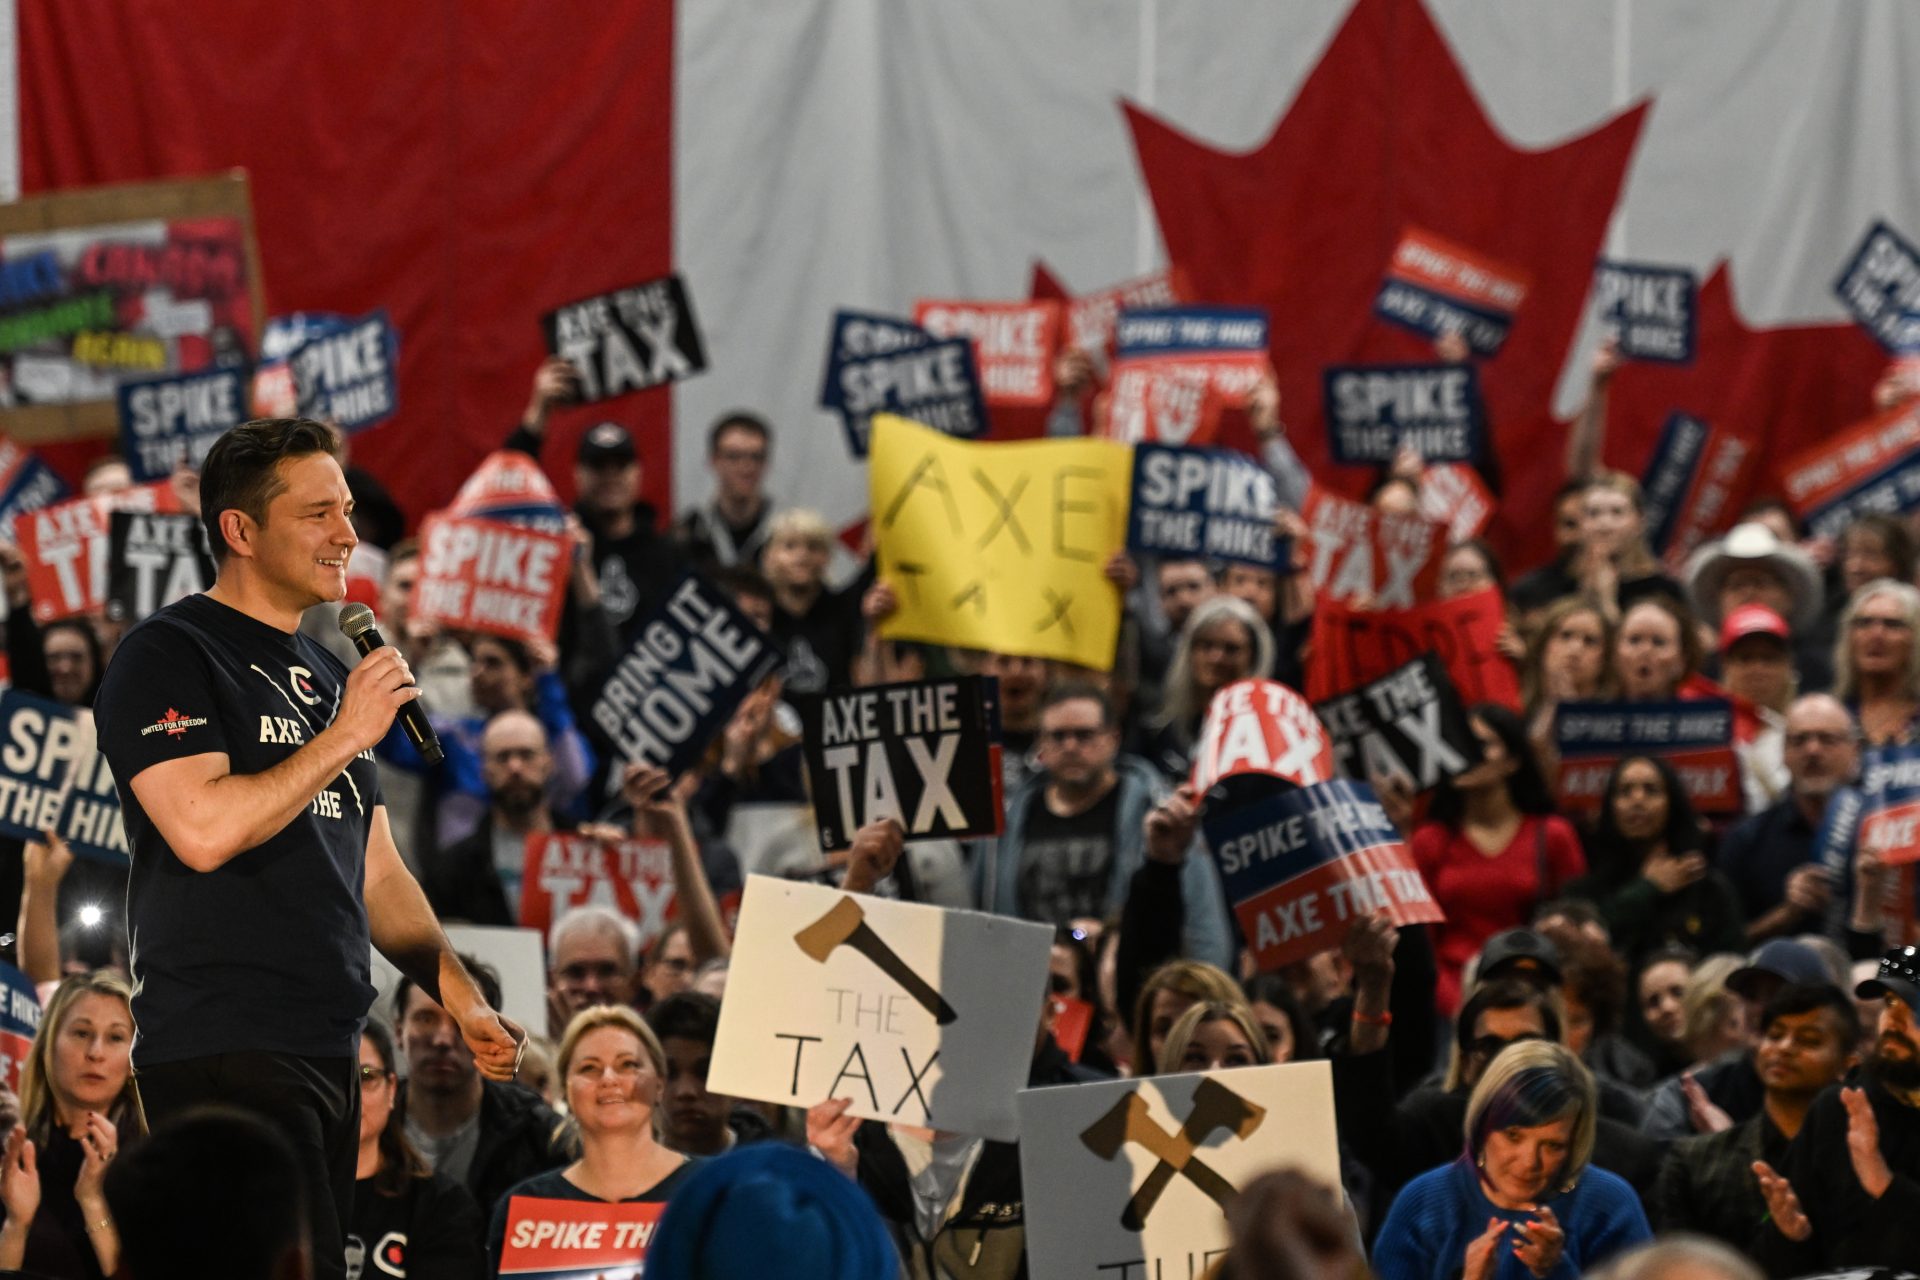 New data shows the Liberals are way down in the polls